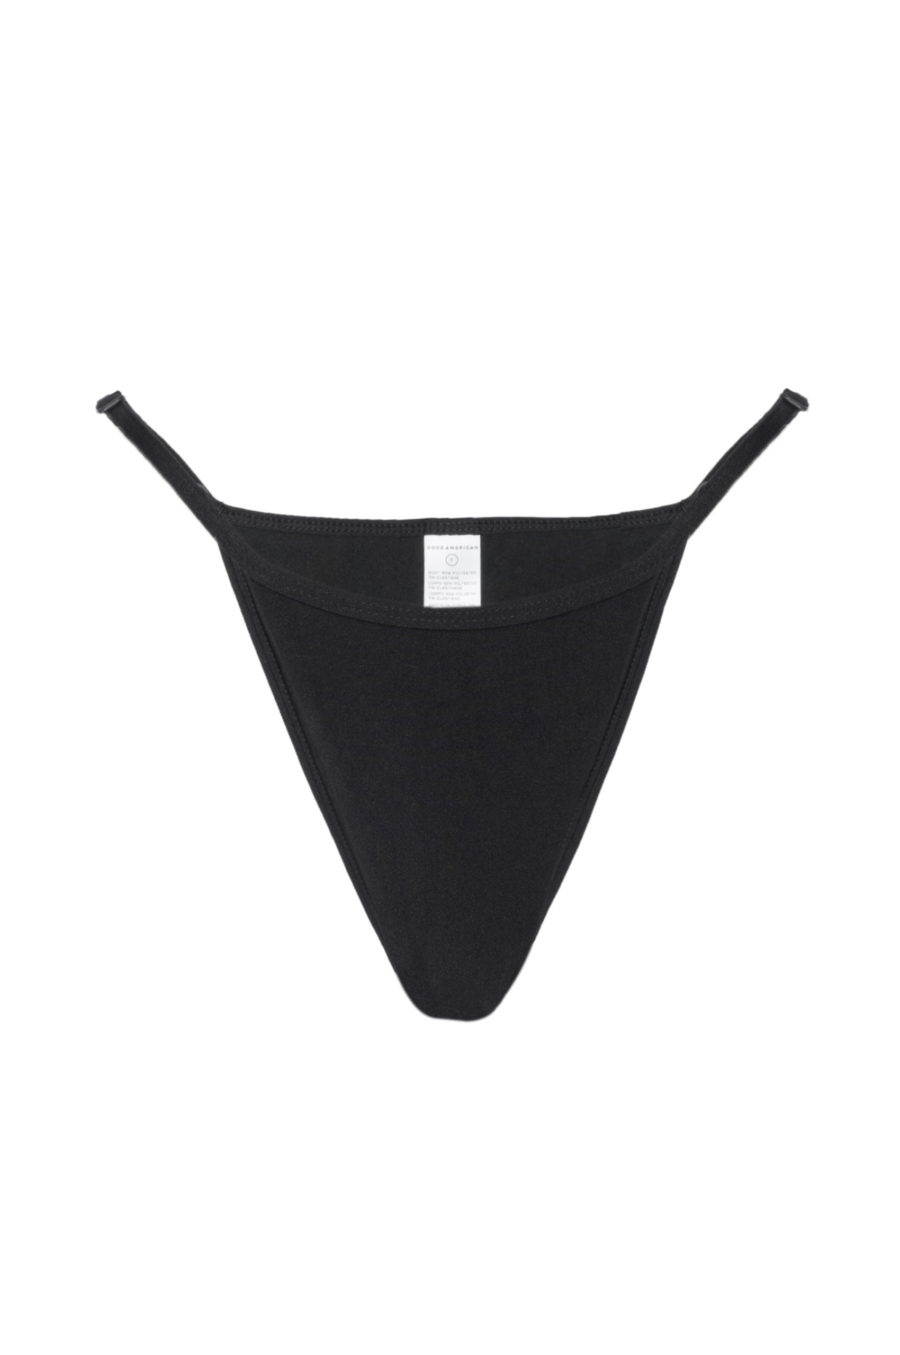 Good American Perfect Fit Bottom $45 (late October restock)